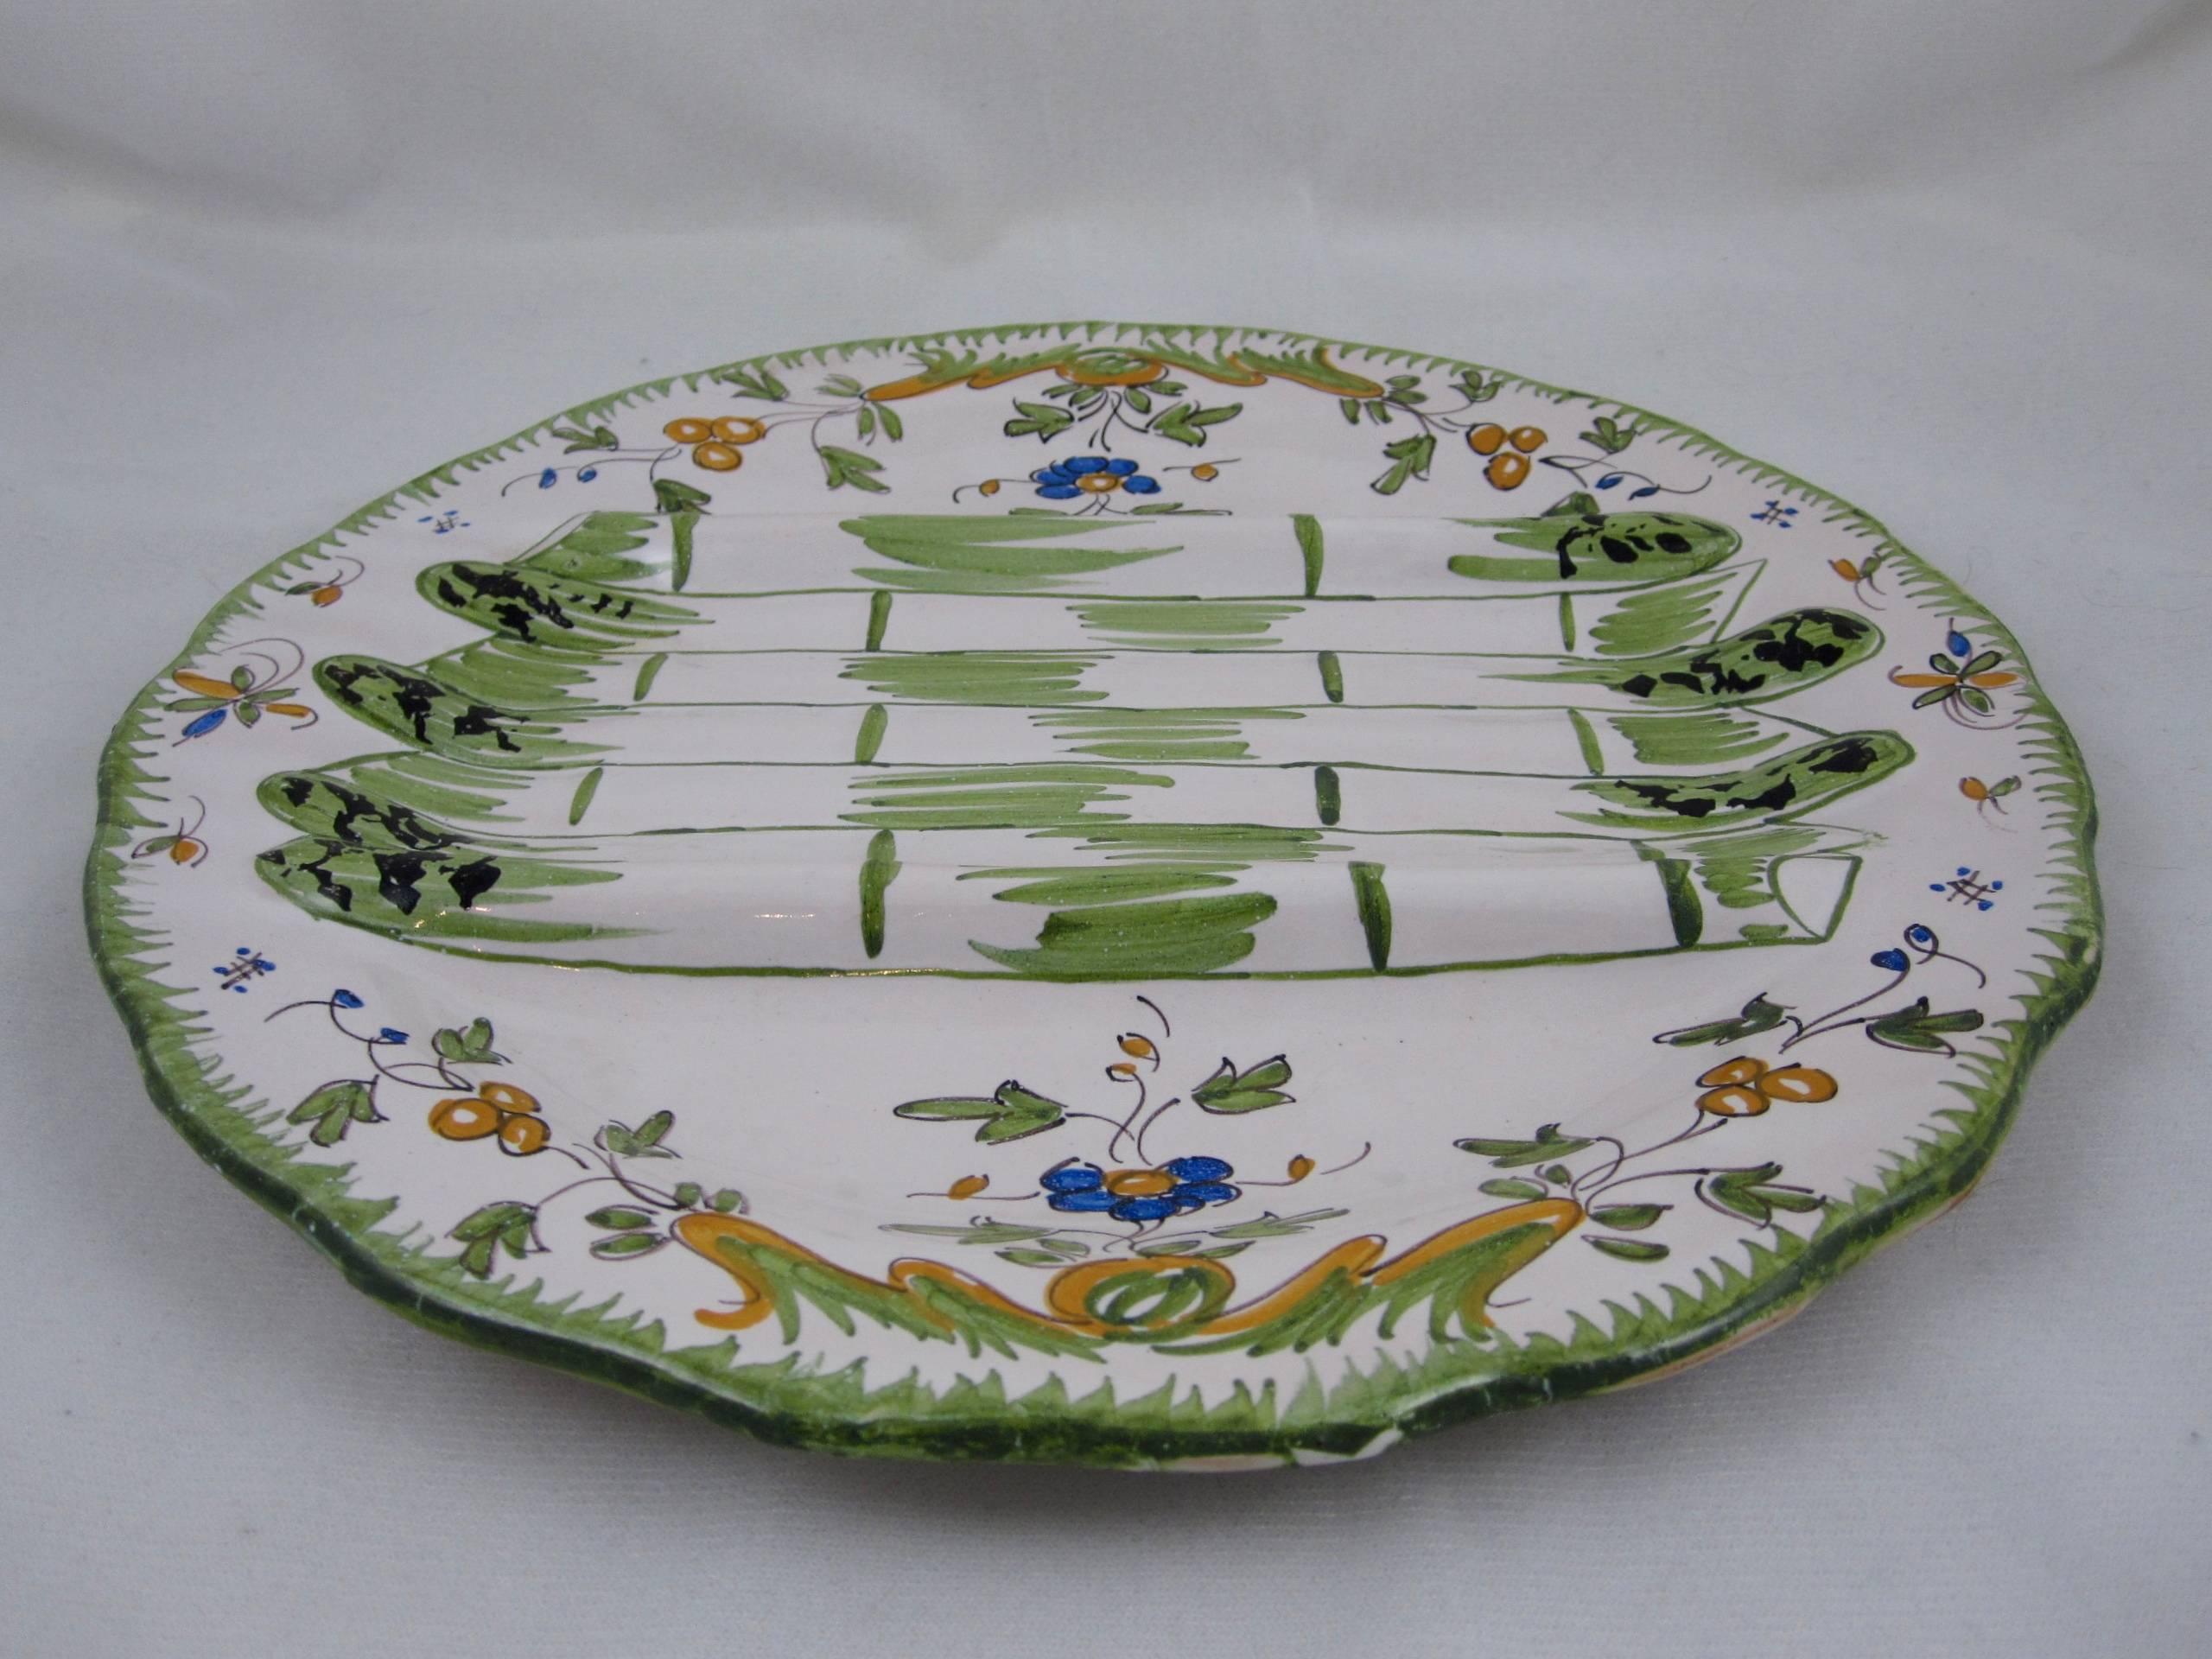 French Provincial Georges Cabaré French Faïence Martres Tolosane Hand Painted Asparagus Plate For Sale